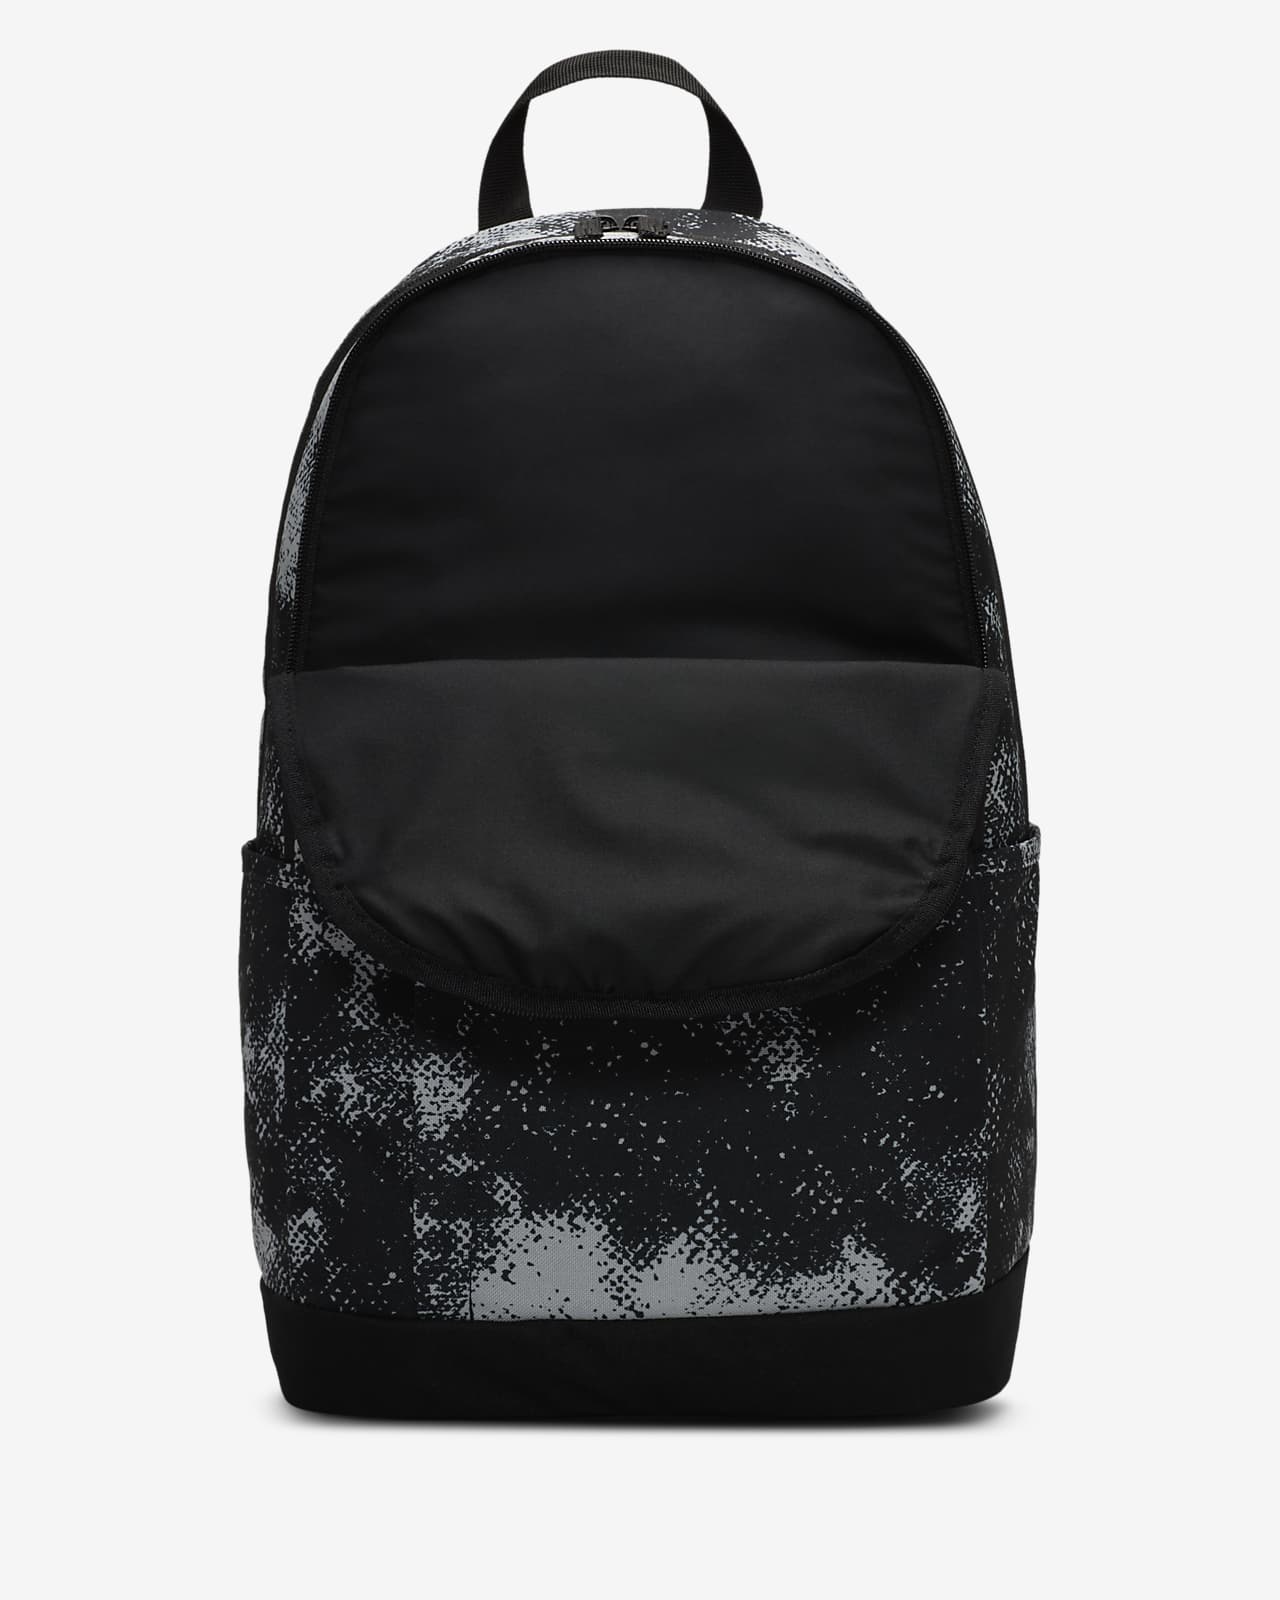 Nike 20 Ltrs Black/Black/White Casual Standard Backpack (Ba6030-013), M :  Amazon.in: Bags, Wallets and Luggage